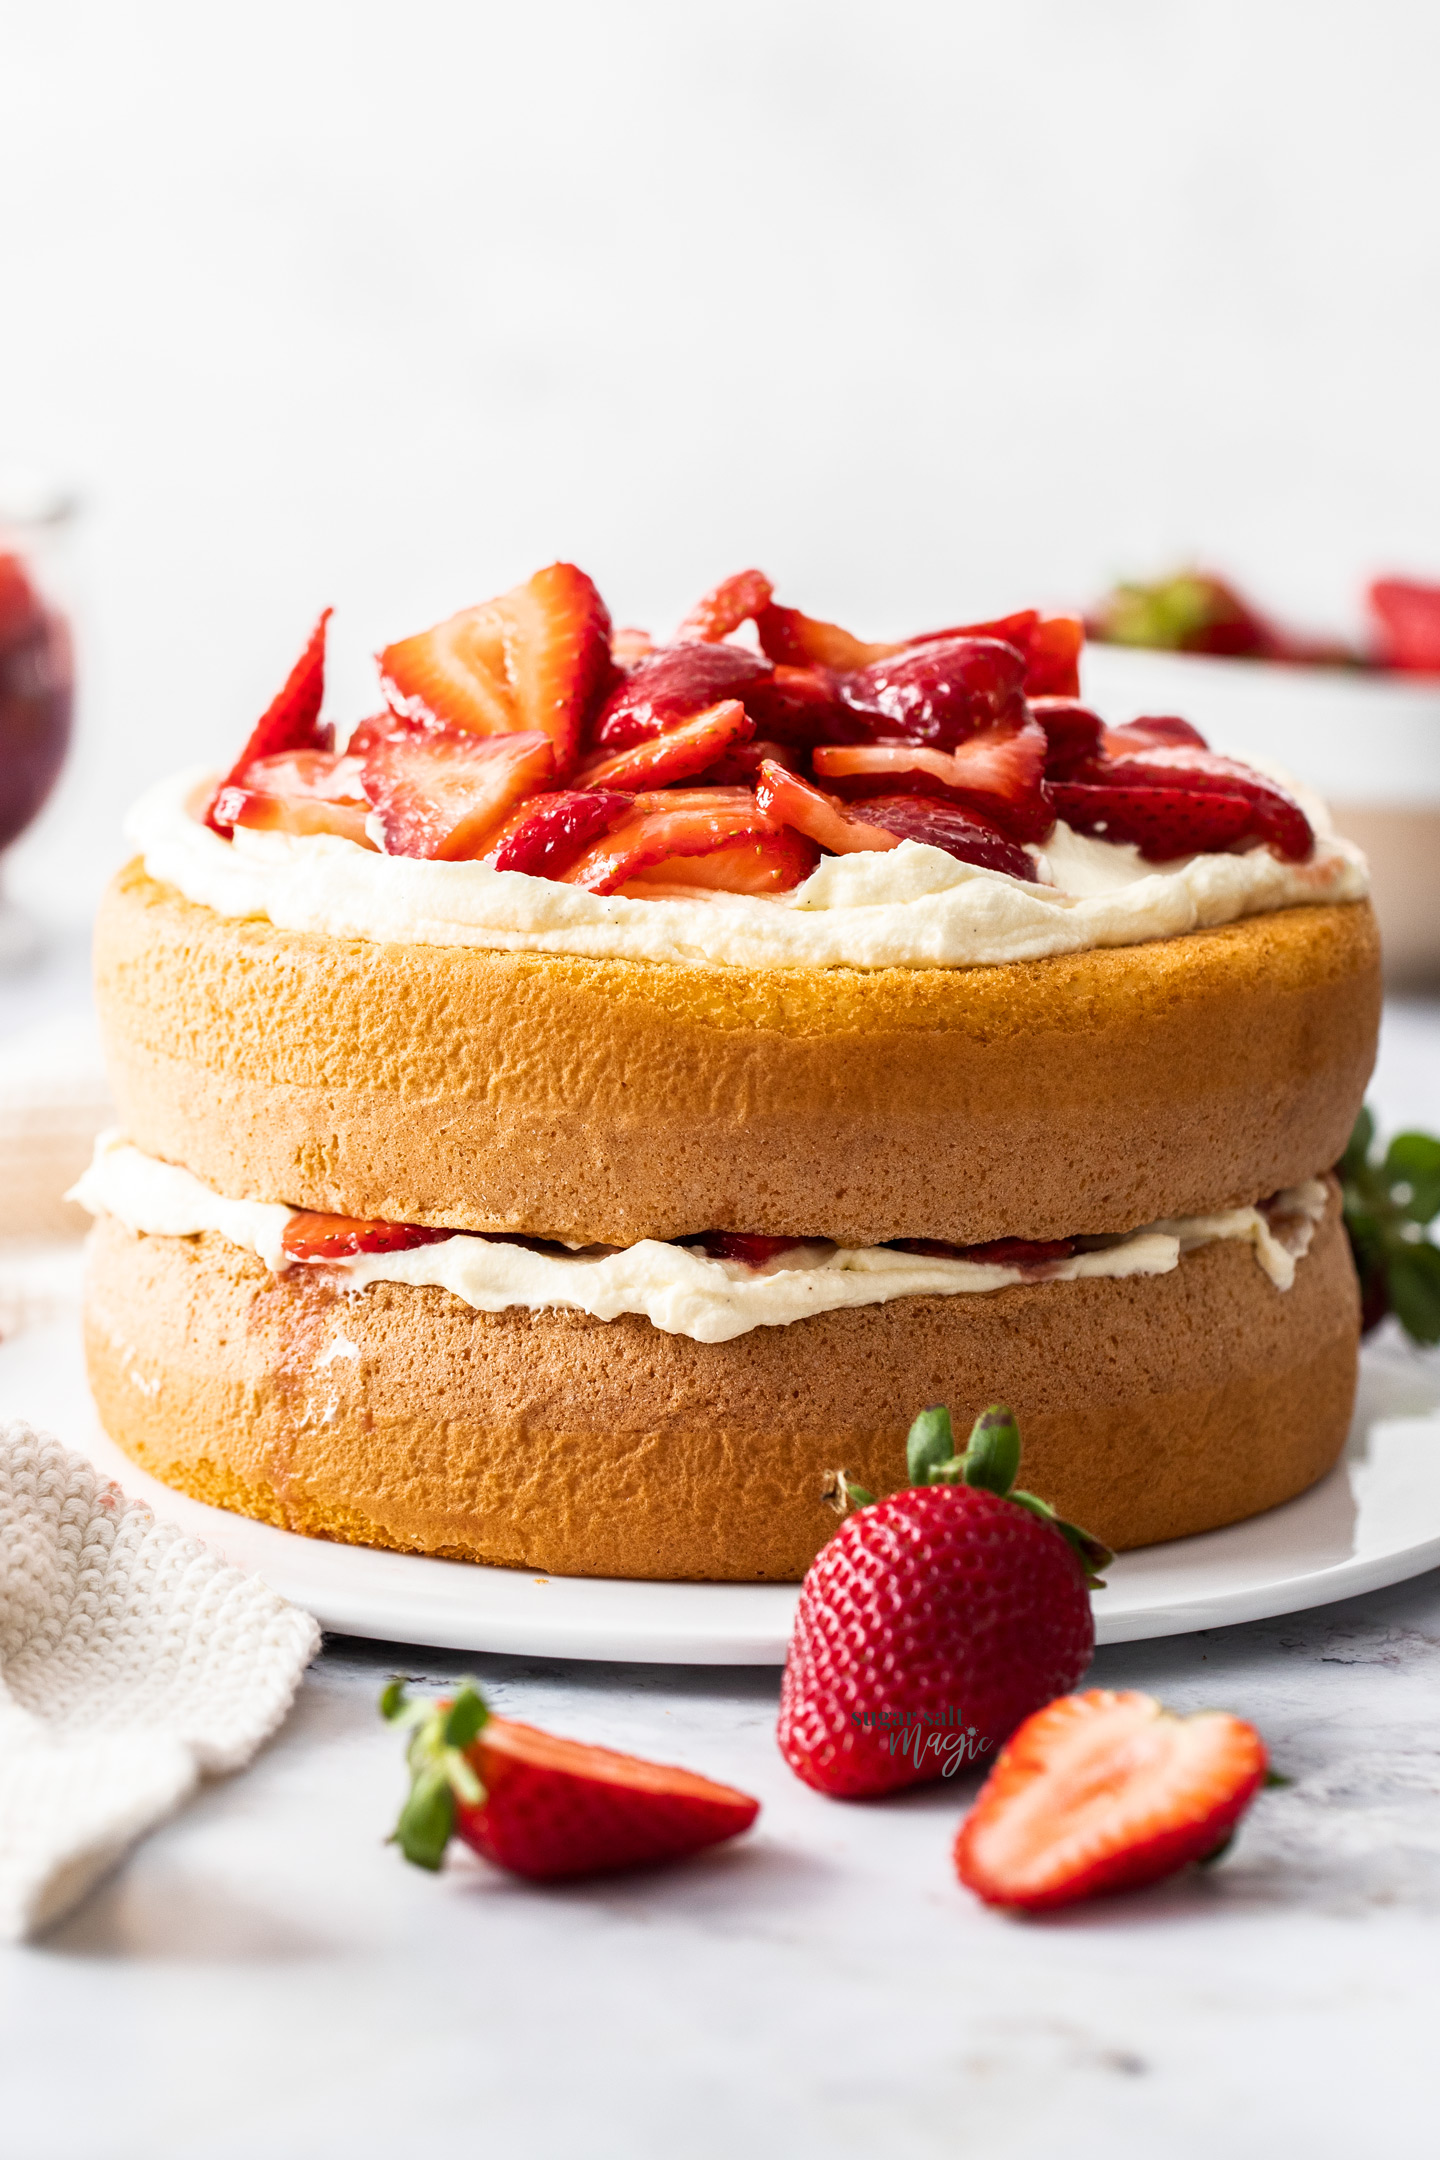 A two layer sponge cake topped with cream and strawberries.